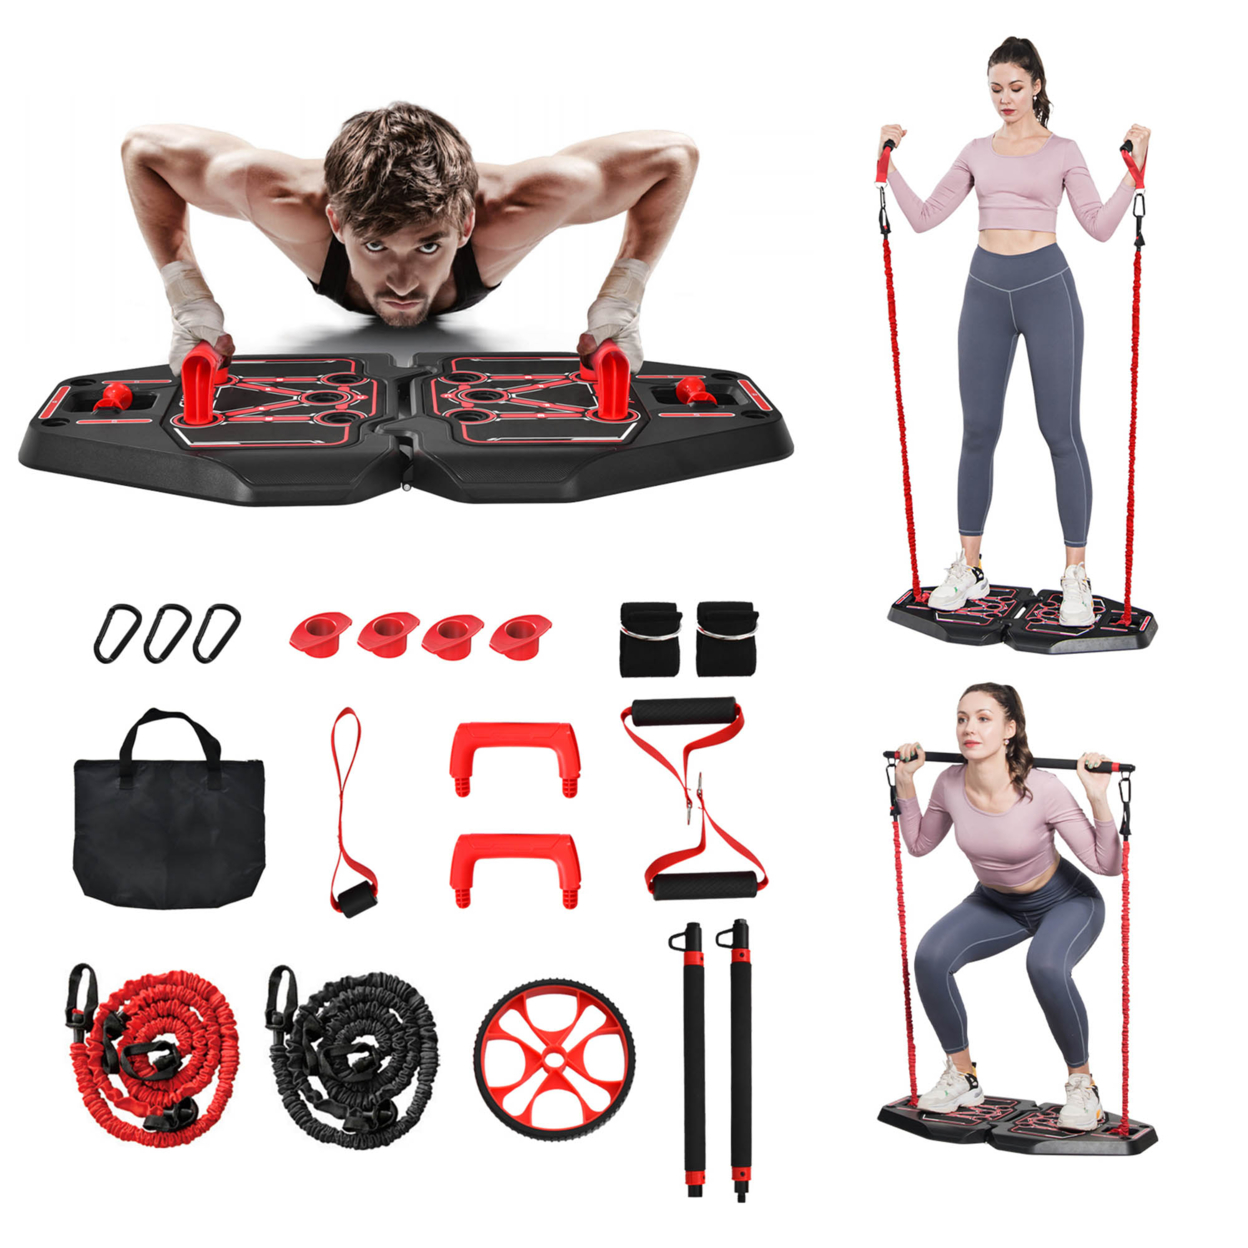 All-in-one Home Gym Portable Pushup Board W/Bag Full Body Strength Training